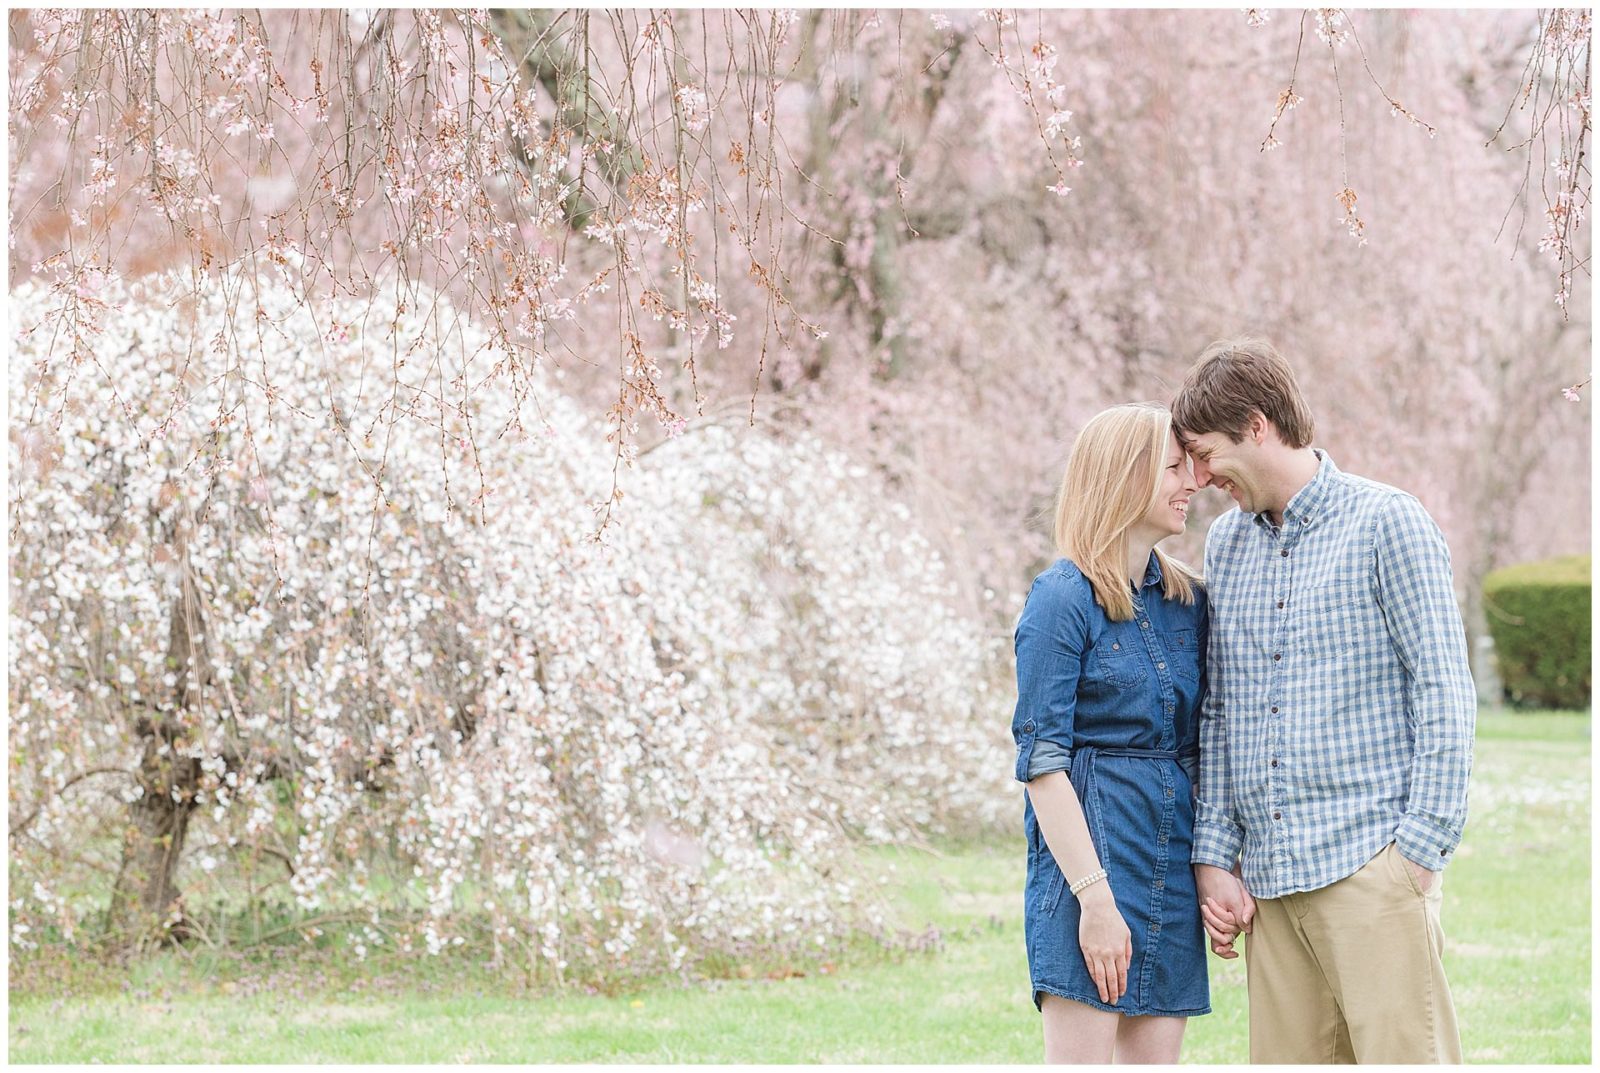 Kevin and Anna standing under a blooming cherry blossom tree in the spring in Lexington, KY